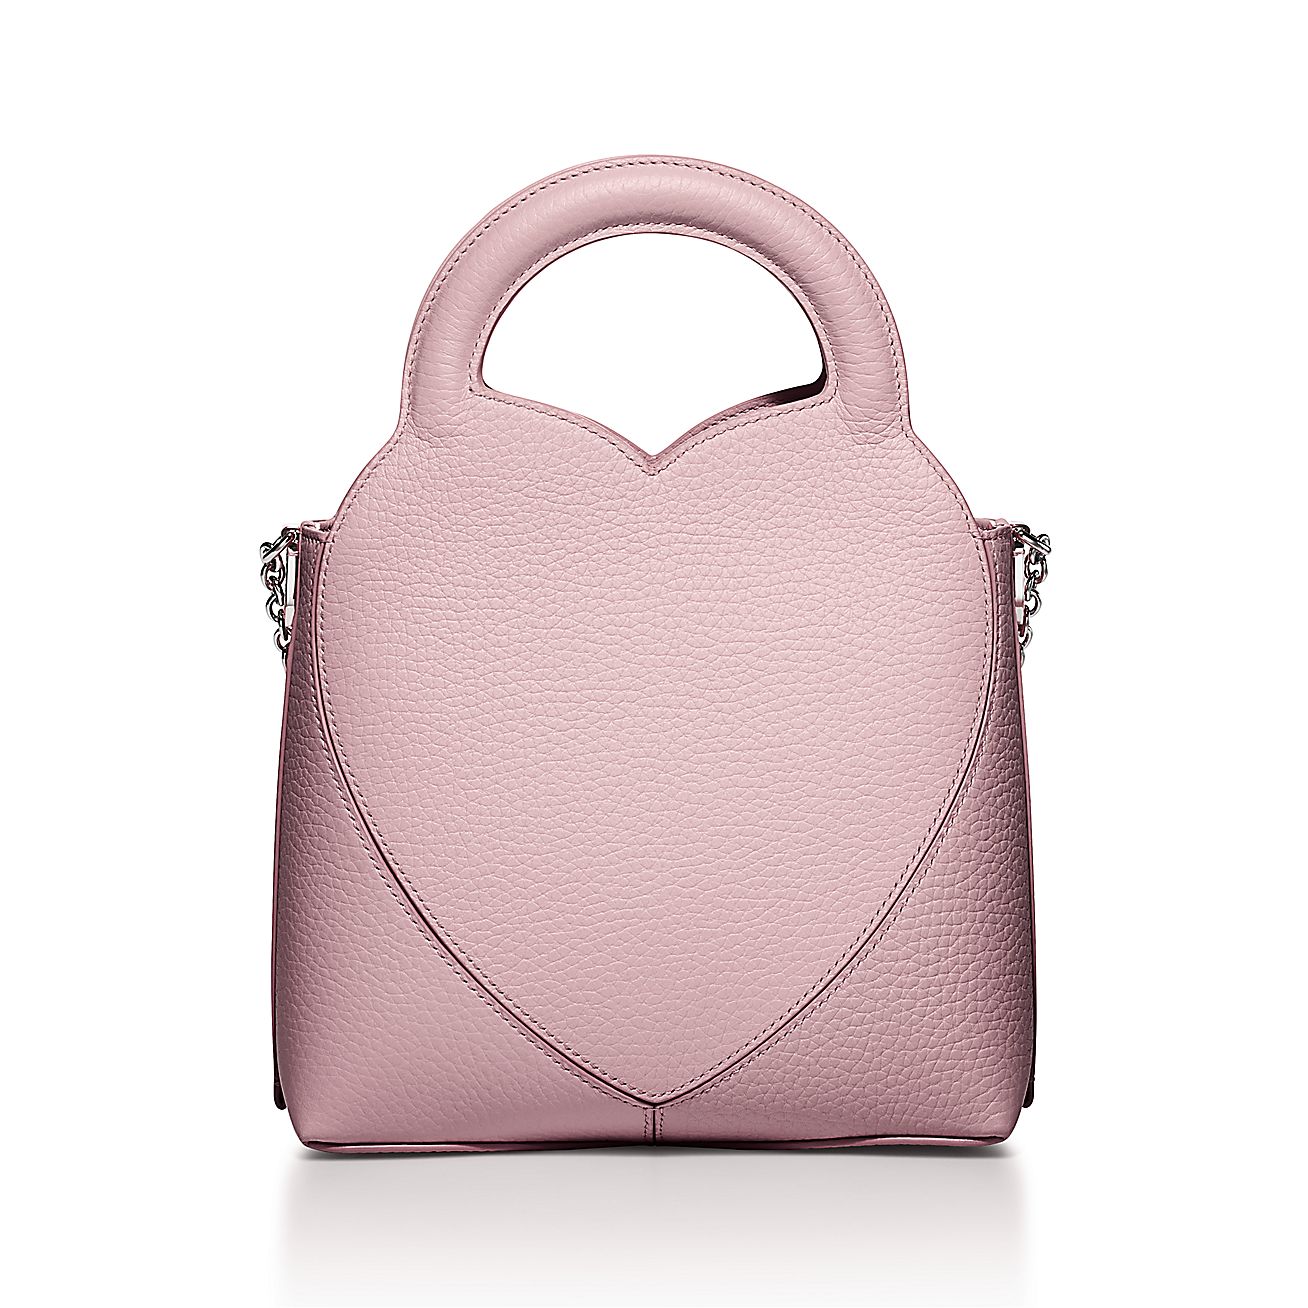 Return to Tiffany Mini Tote Bag in Crystal Pink Leather